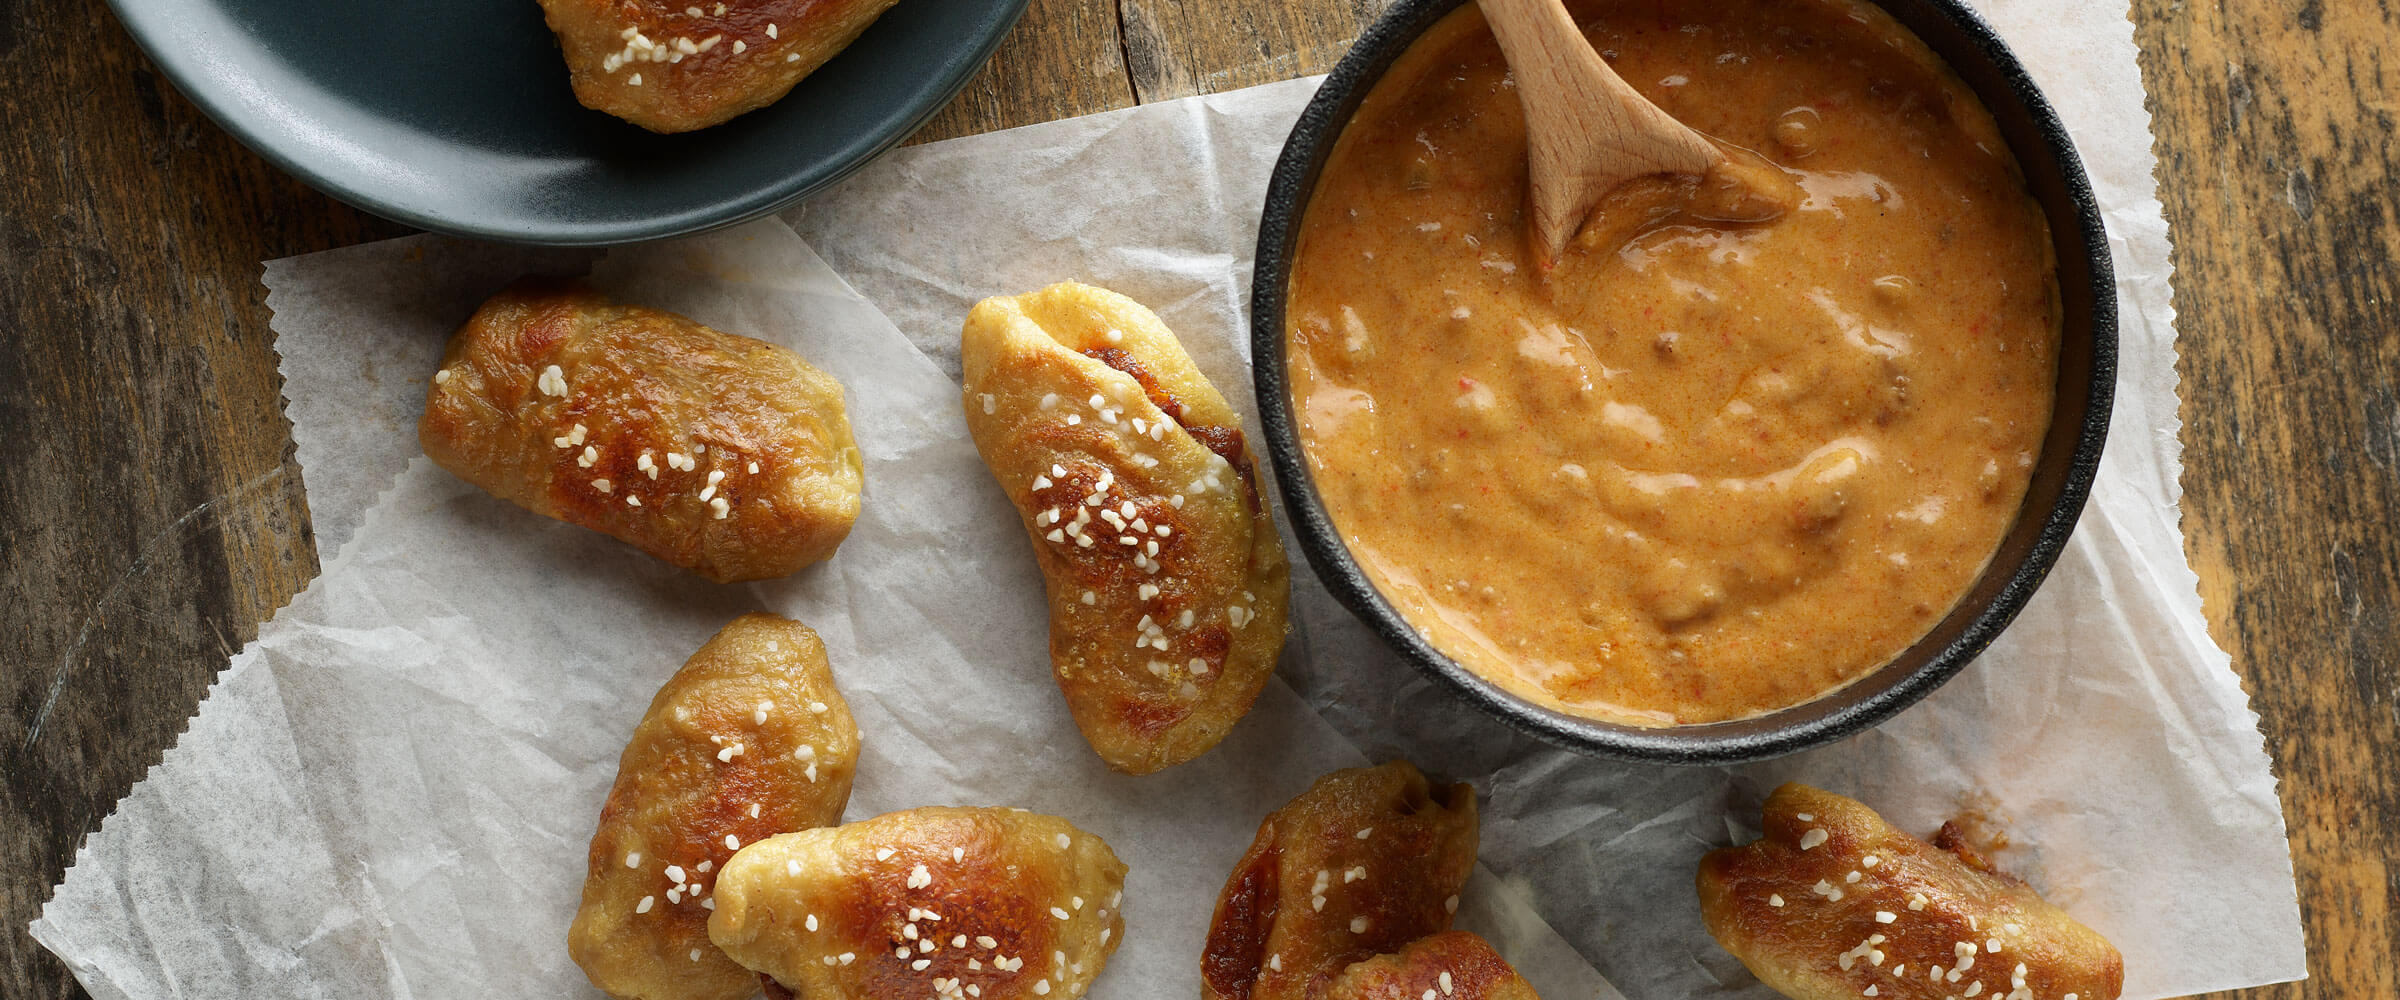 Chili Stuffed Pretzel Bites with Chili Cheese Dip on parchment paper with serving spoon